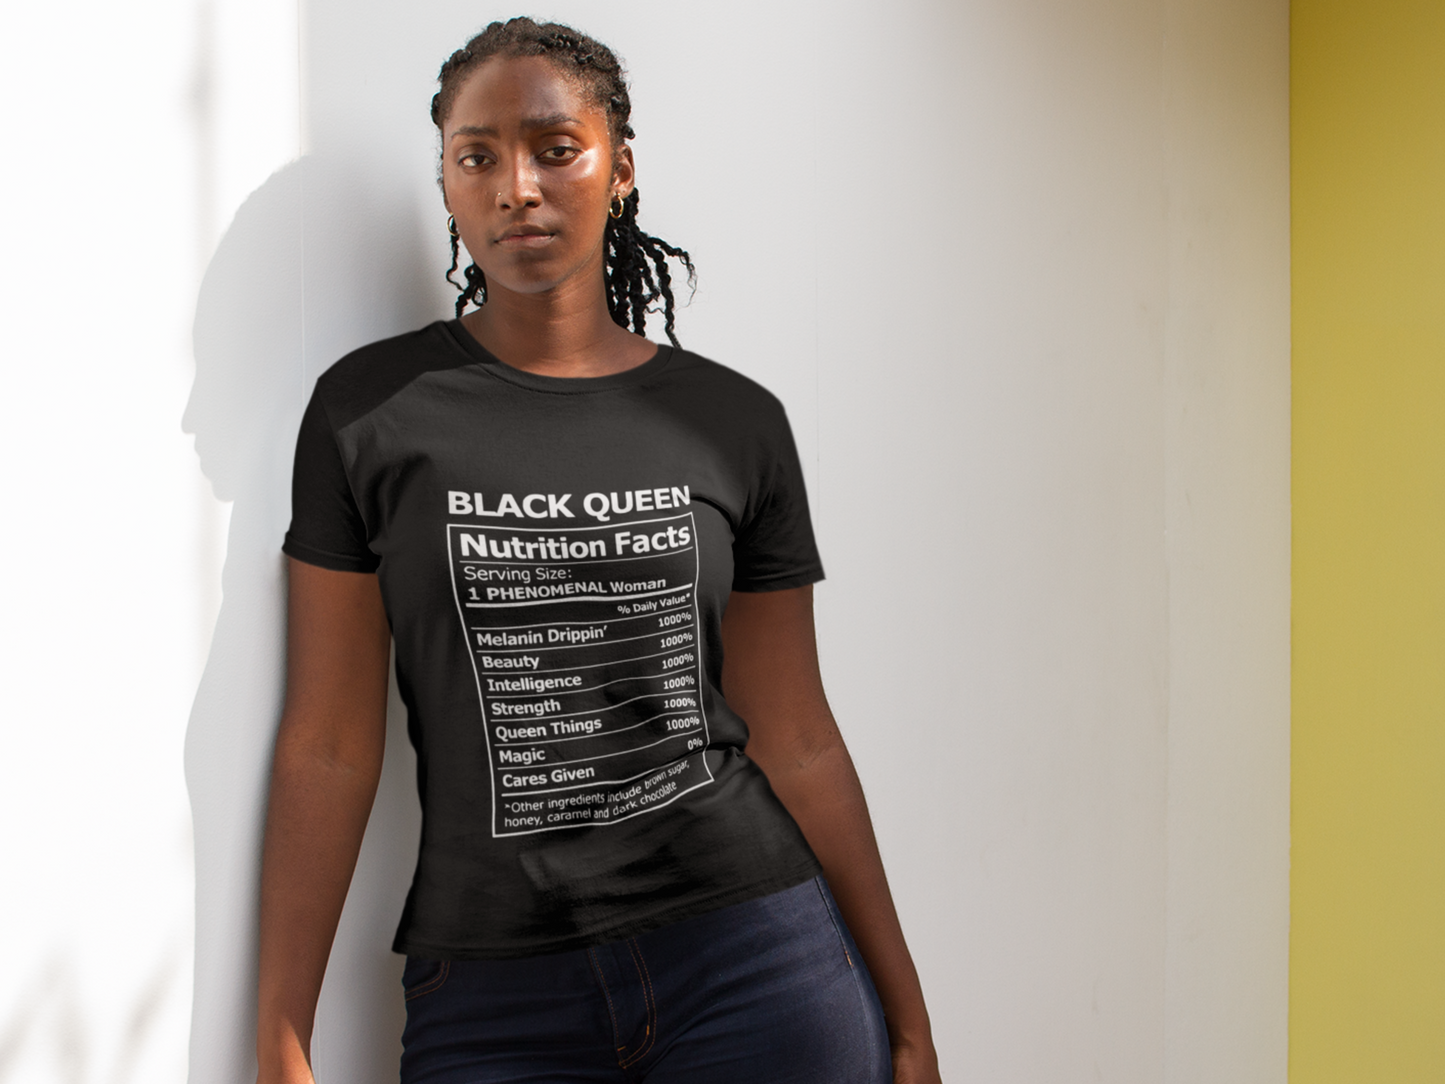 "Black Queen Nutrition Facts" T-Shirt (Available in Black, Red, & Blue)